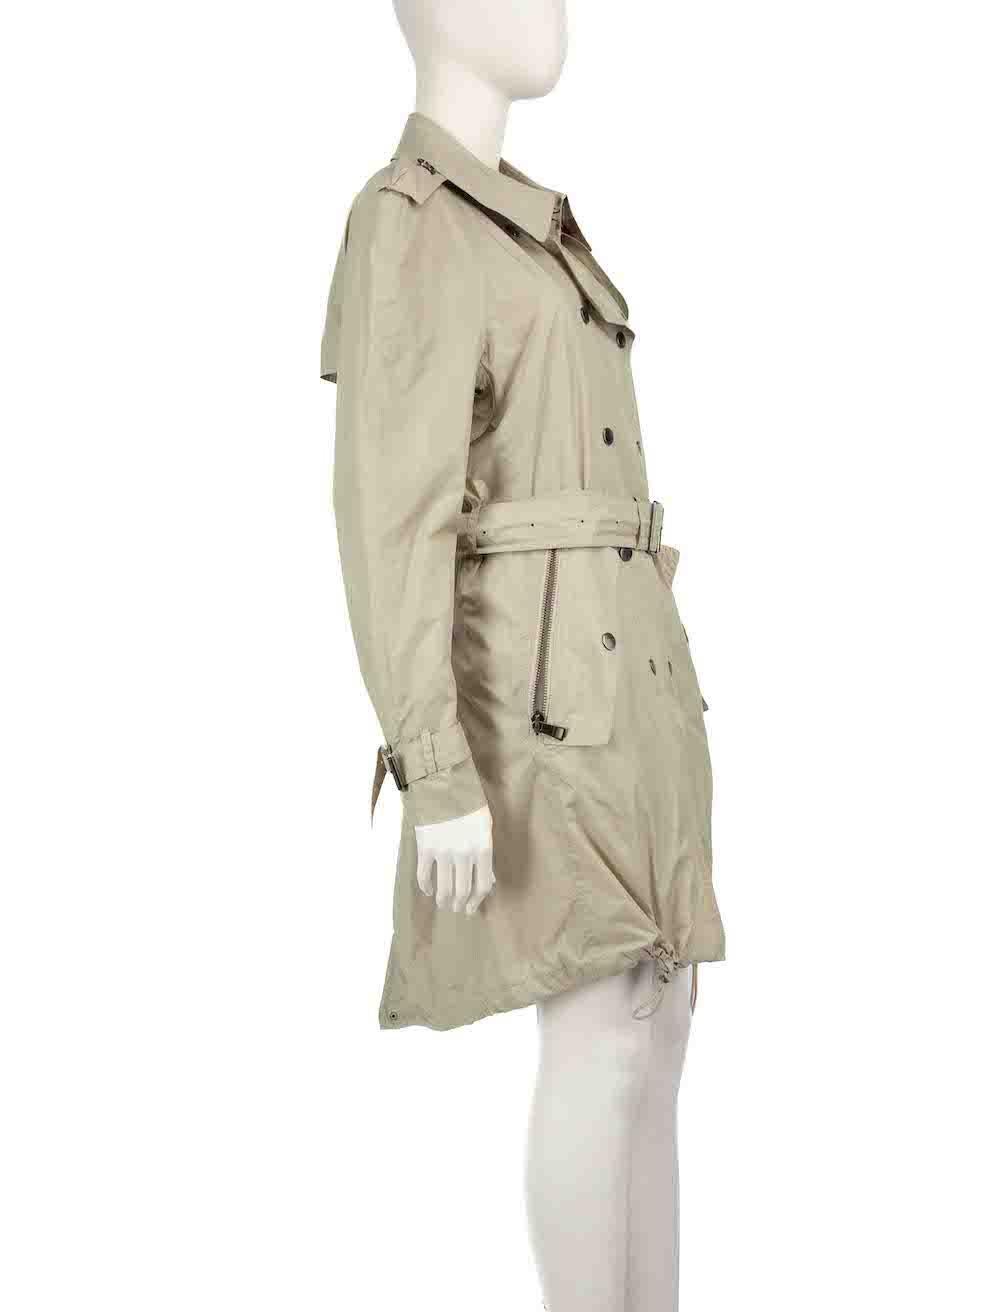 CONDITION is Very good. Hardly any visible wear to the coat is evident on this used Burberry Brit designer resale item.
 
 
 
 Details
 
 
 Ecru
 
 Synthetic
 
 Rain coat
 
 Mid length
 
 Belted
 
 Double breasted
 
 Snap button fastening
 
 Neck